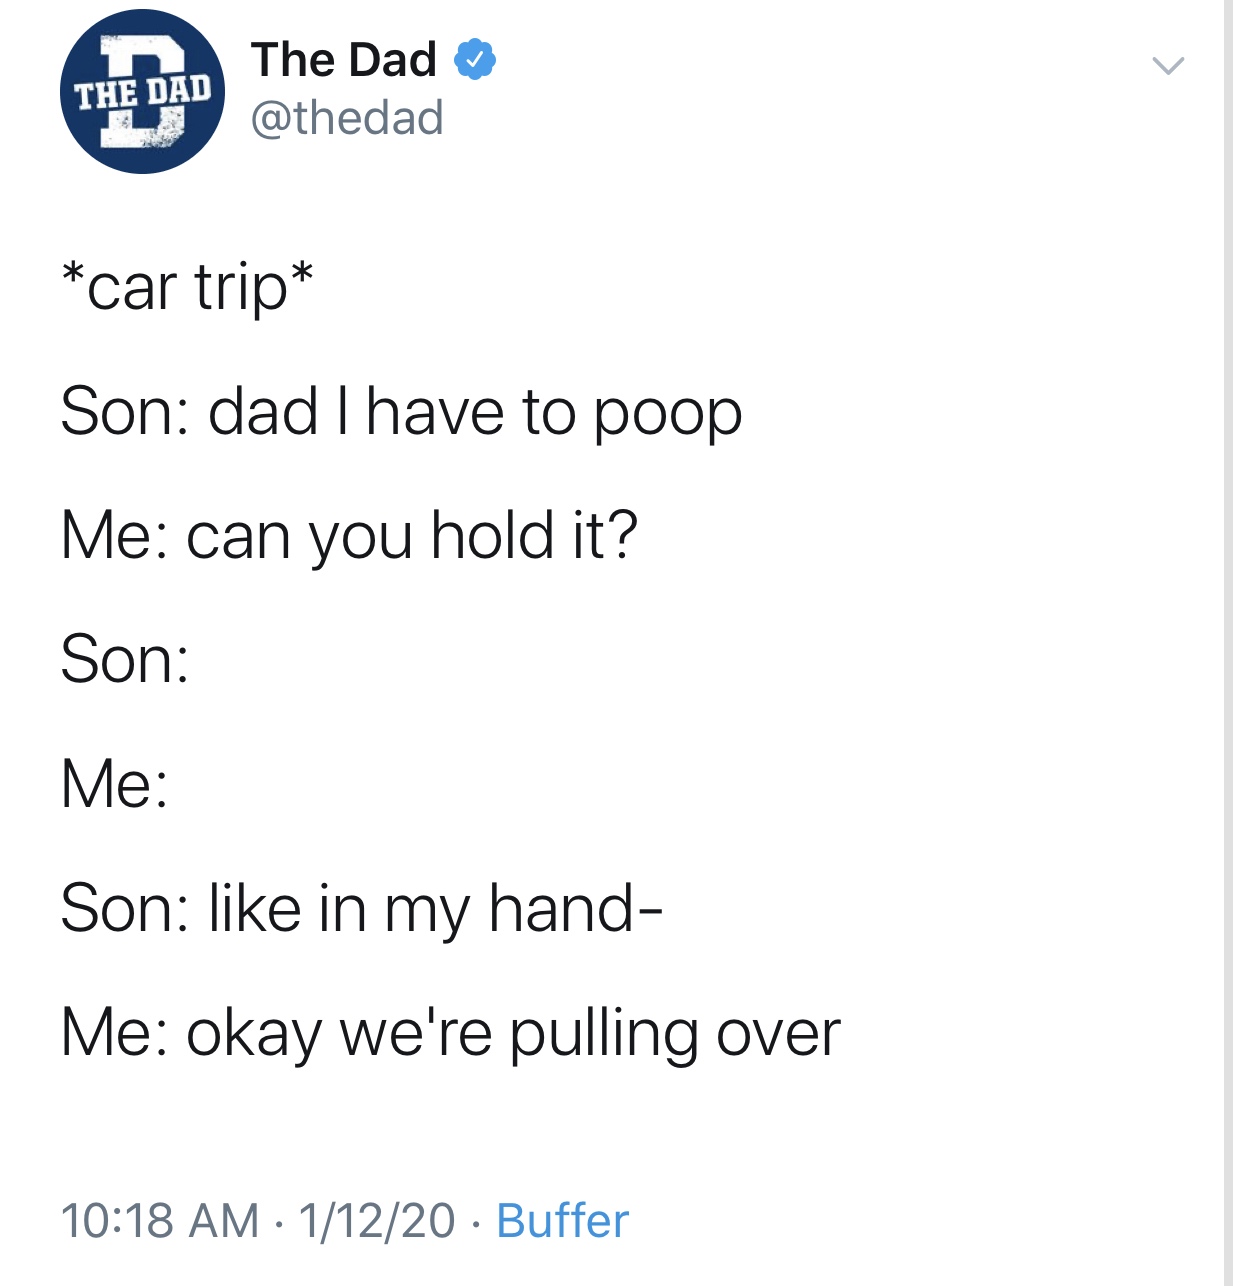 angle - The Dad The Dad car trip Son dad I have to poop Me can you hold it? Son Me Son in my hand Me okay we're pulling over 11220 Buffer